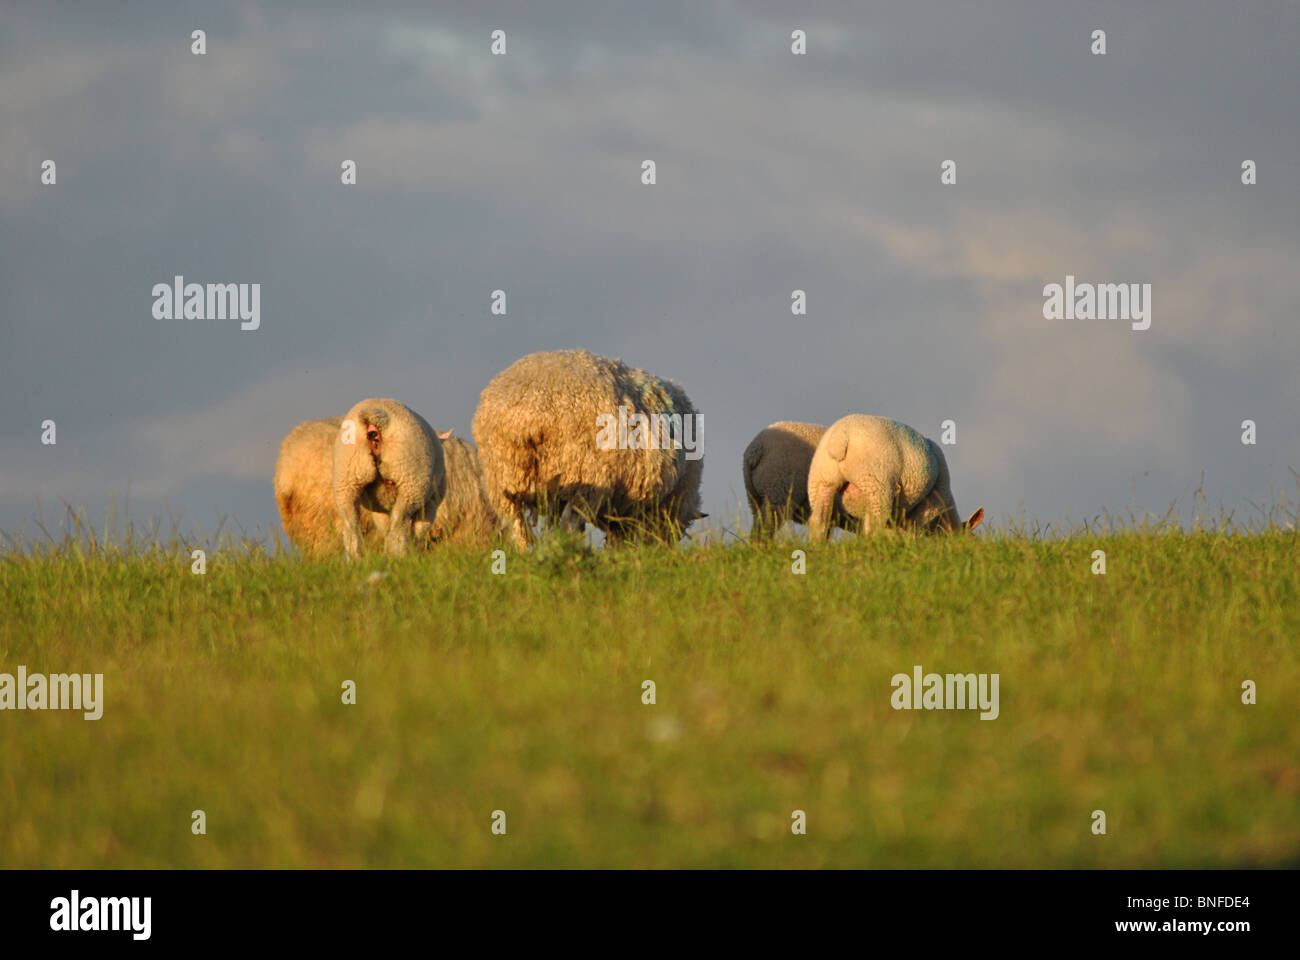 Sheep in a field on a stormy evening, Marshwood Vale, Dorset, England Stock Photo